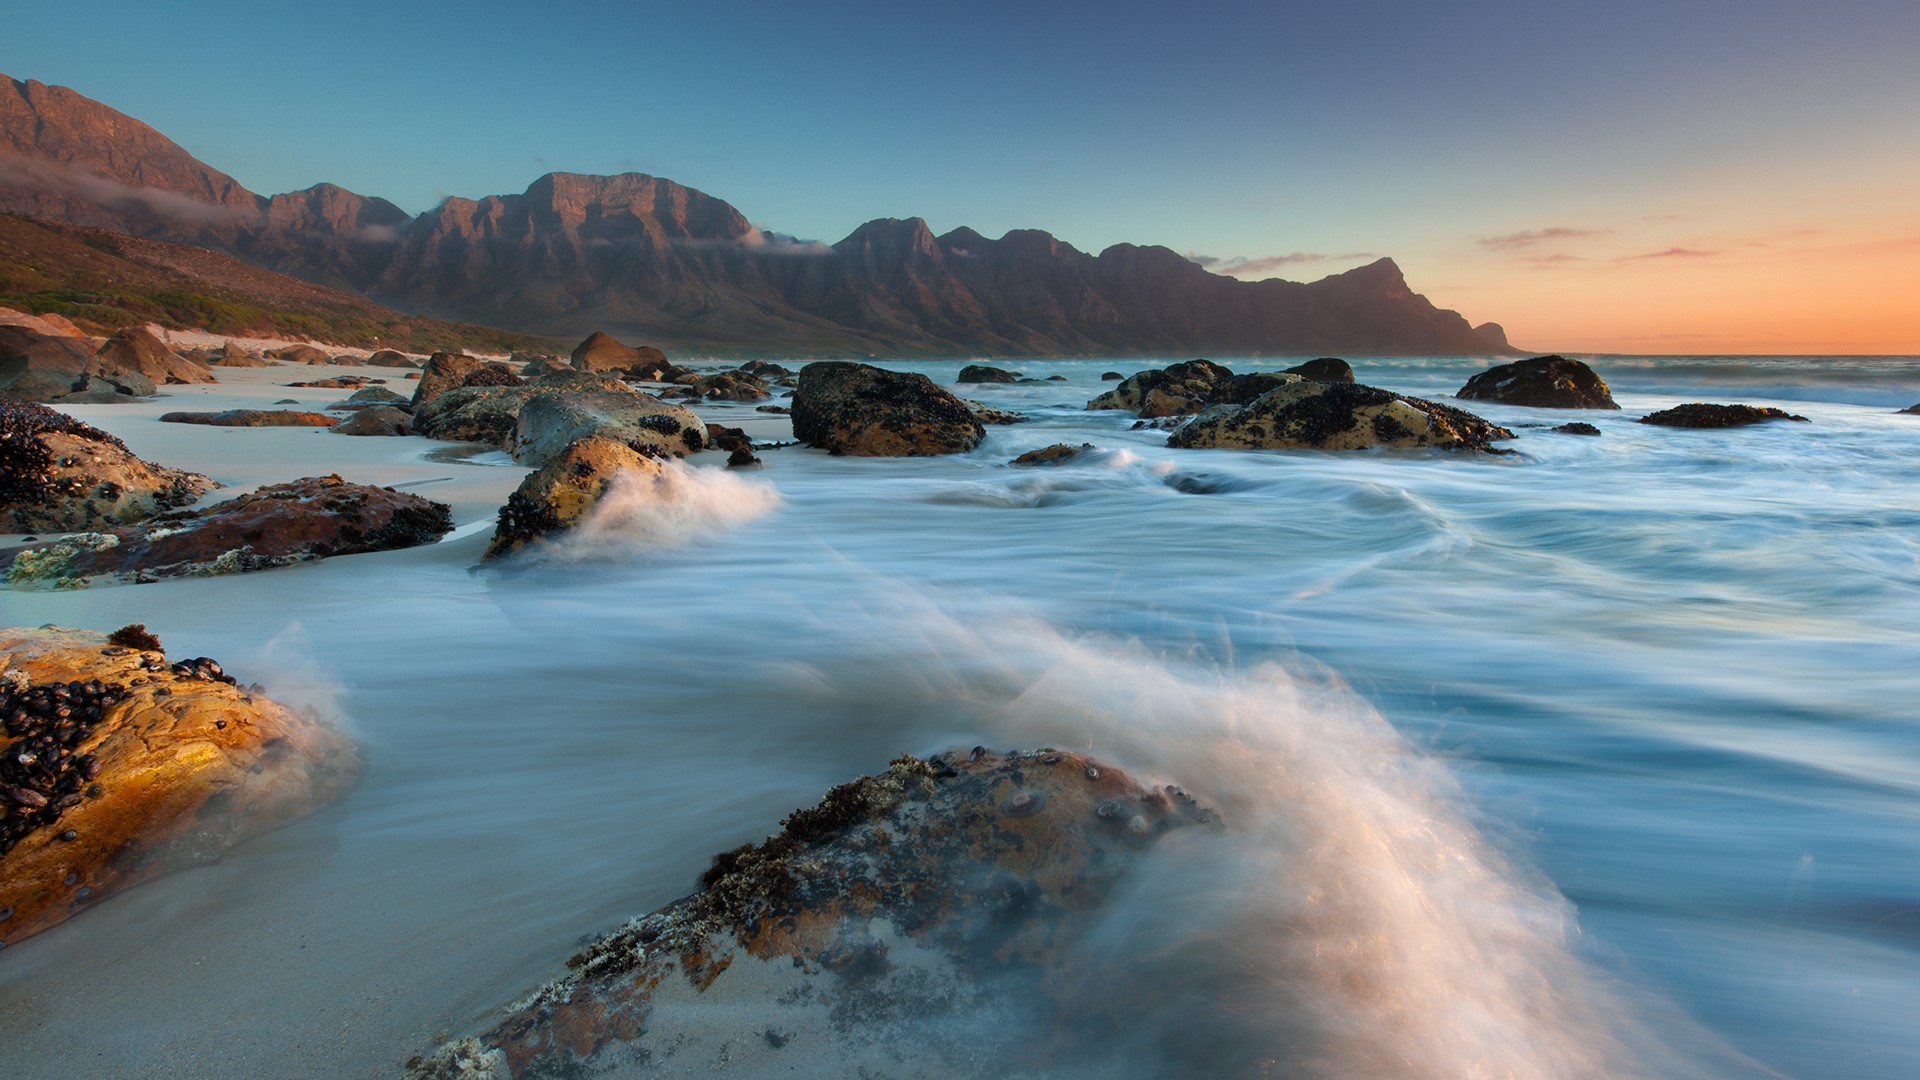 General 1920x1080 nature landscape mountains rocks sand water waves long exposure coast sunset South Africa